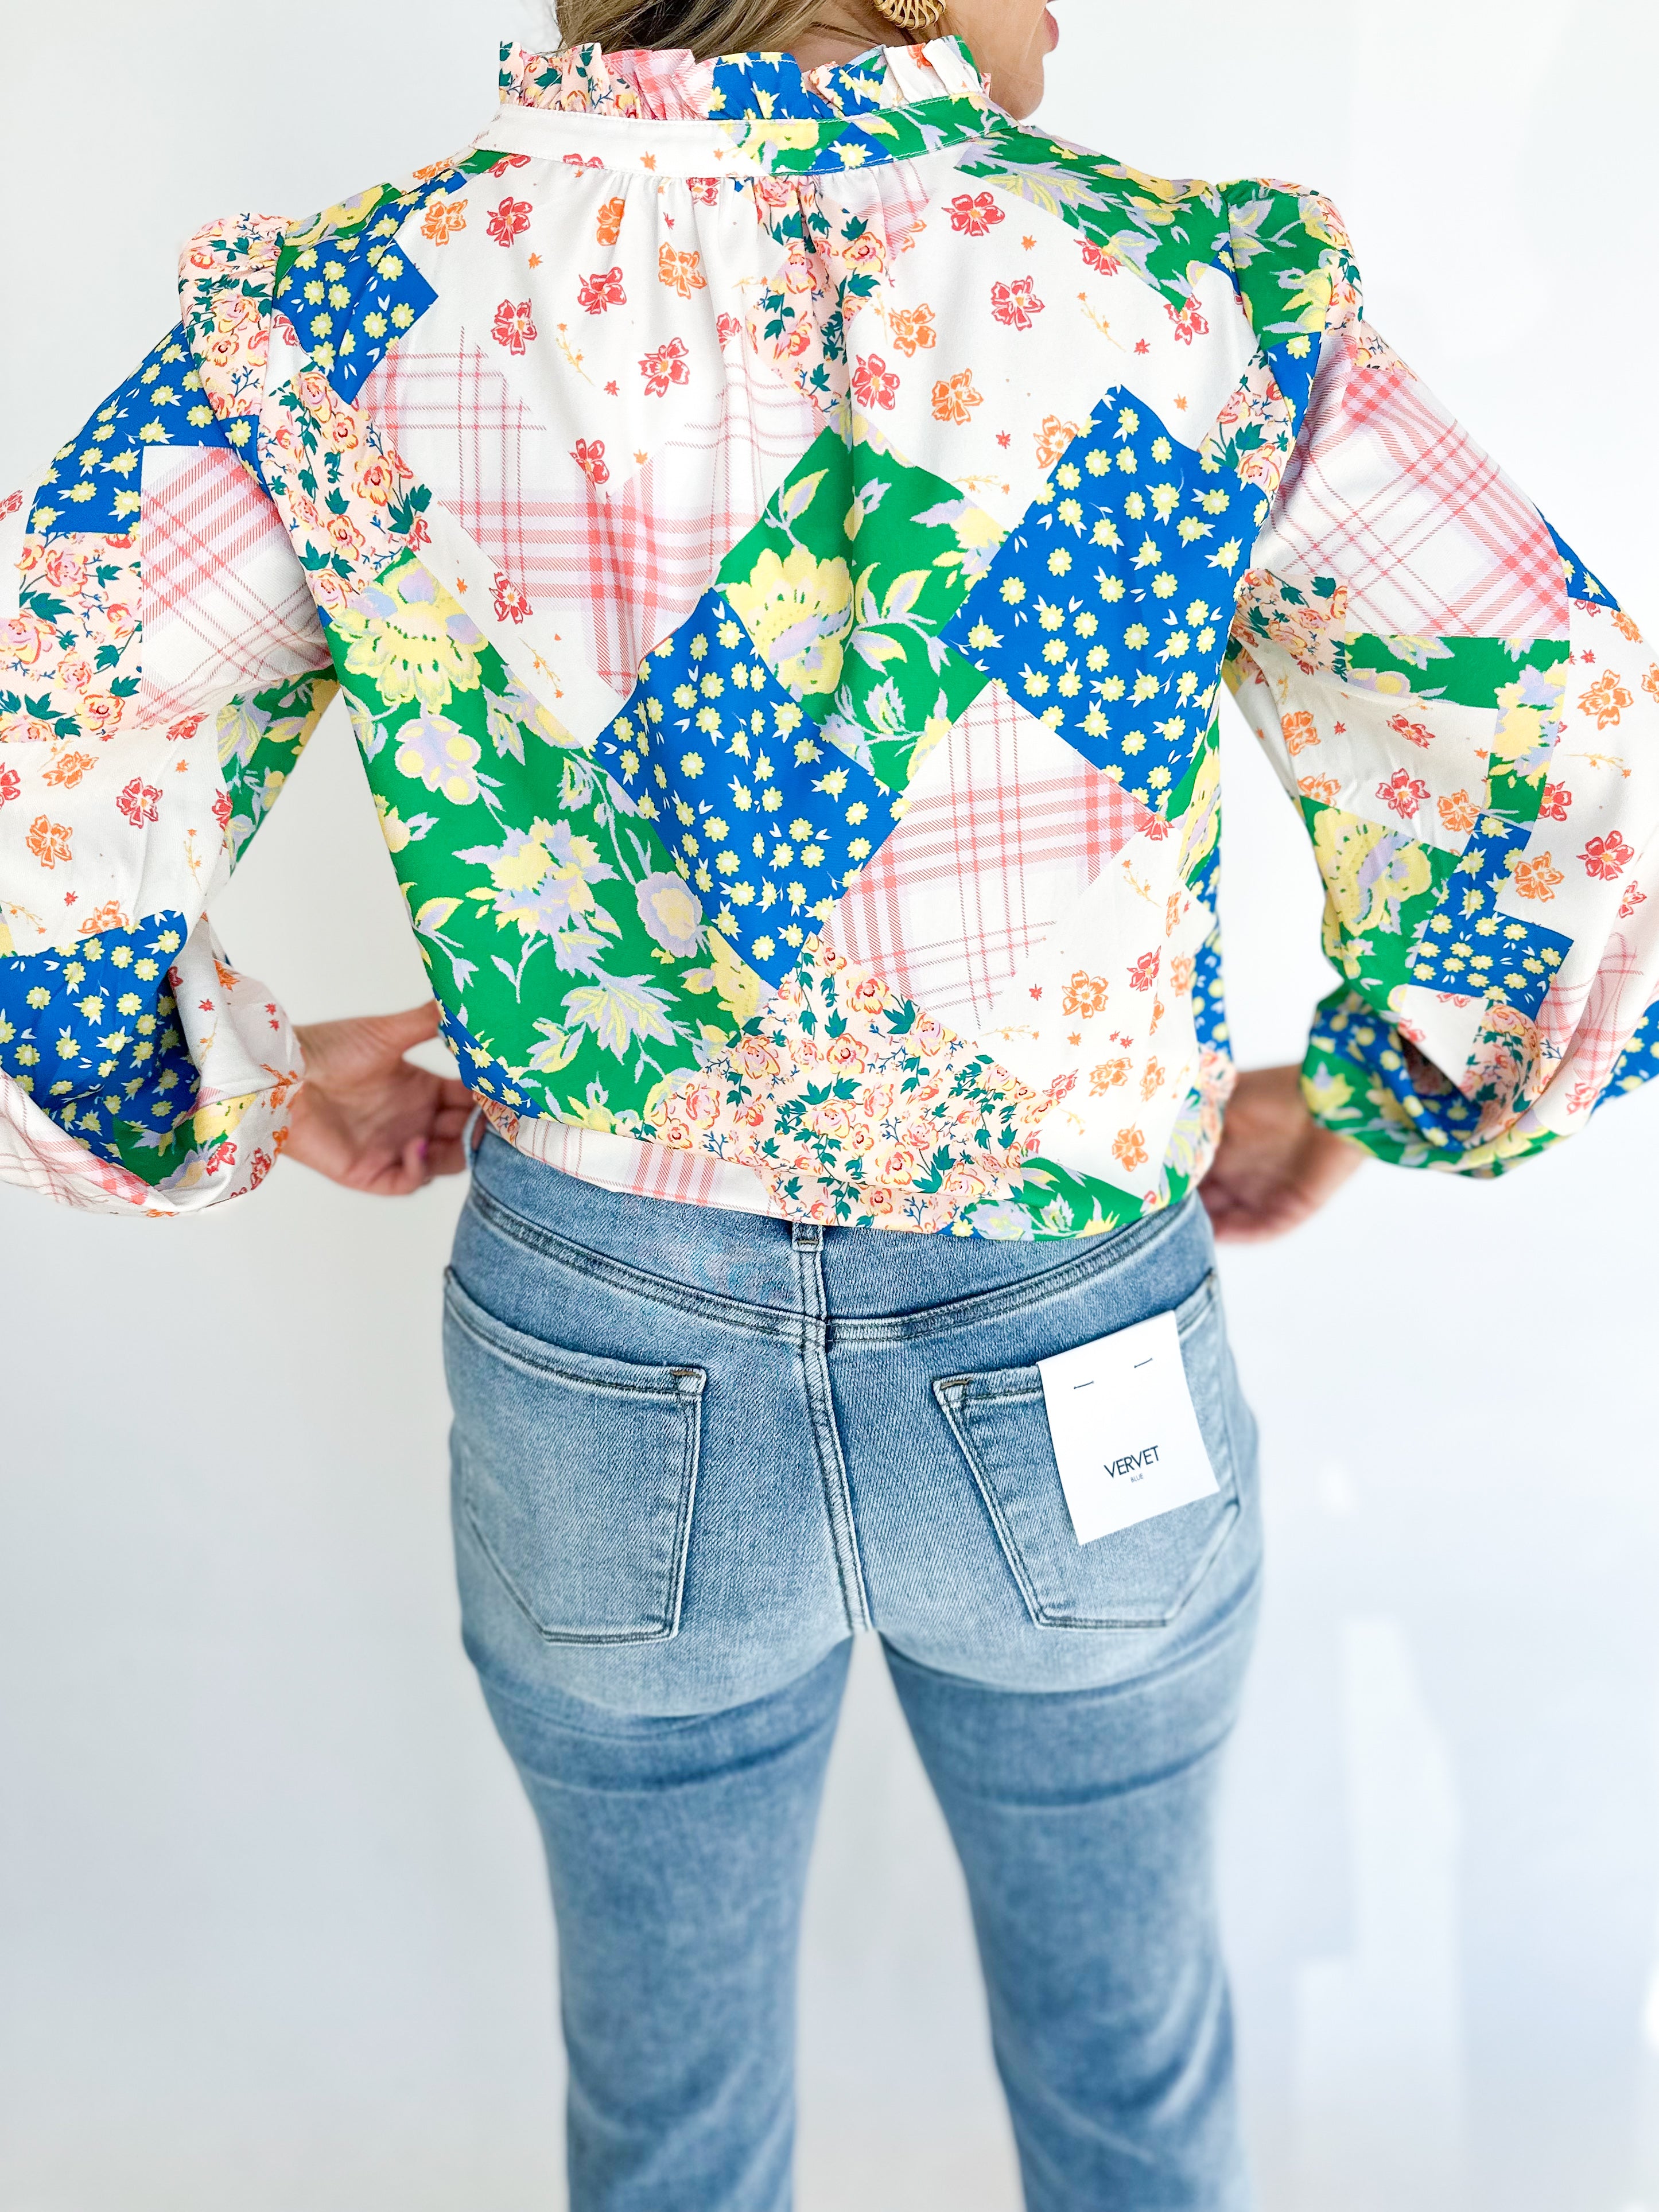 Spring Patchwork Blouse-200 Fashion Blouses-FATE-July & June Women's Fashion Boutique Located in San Antonio, Texas